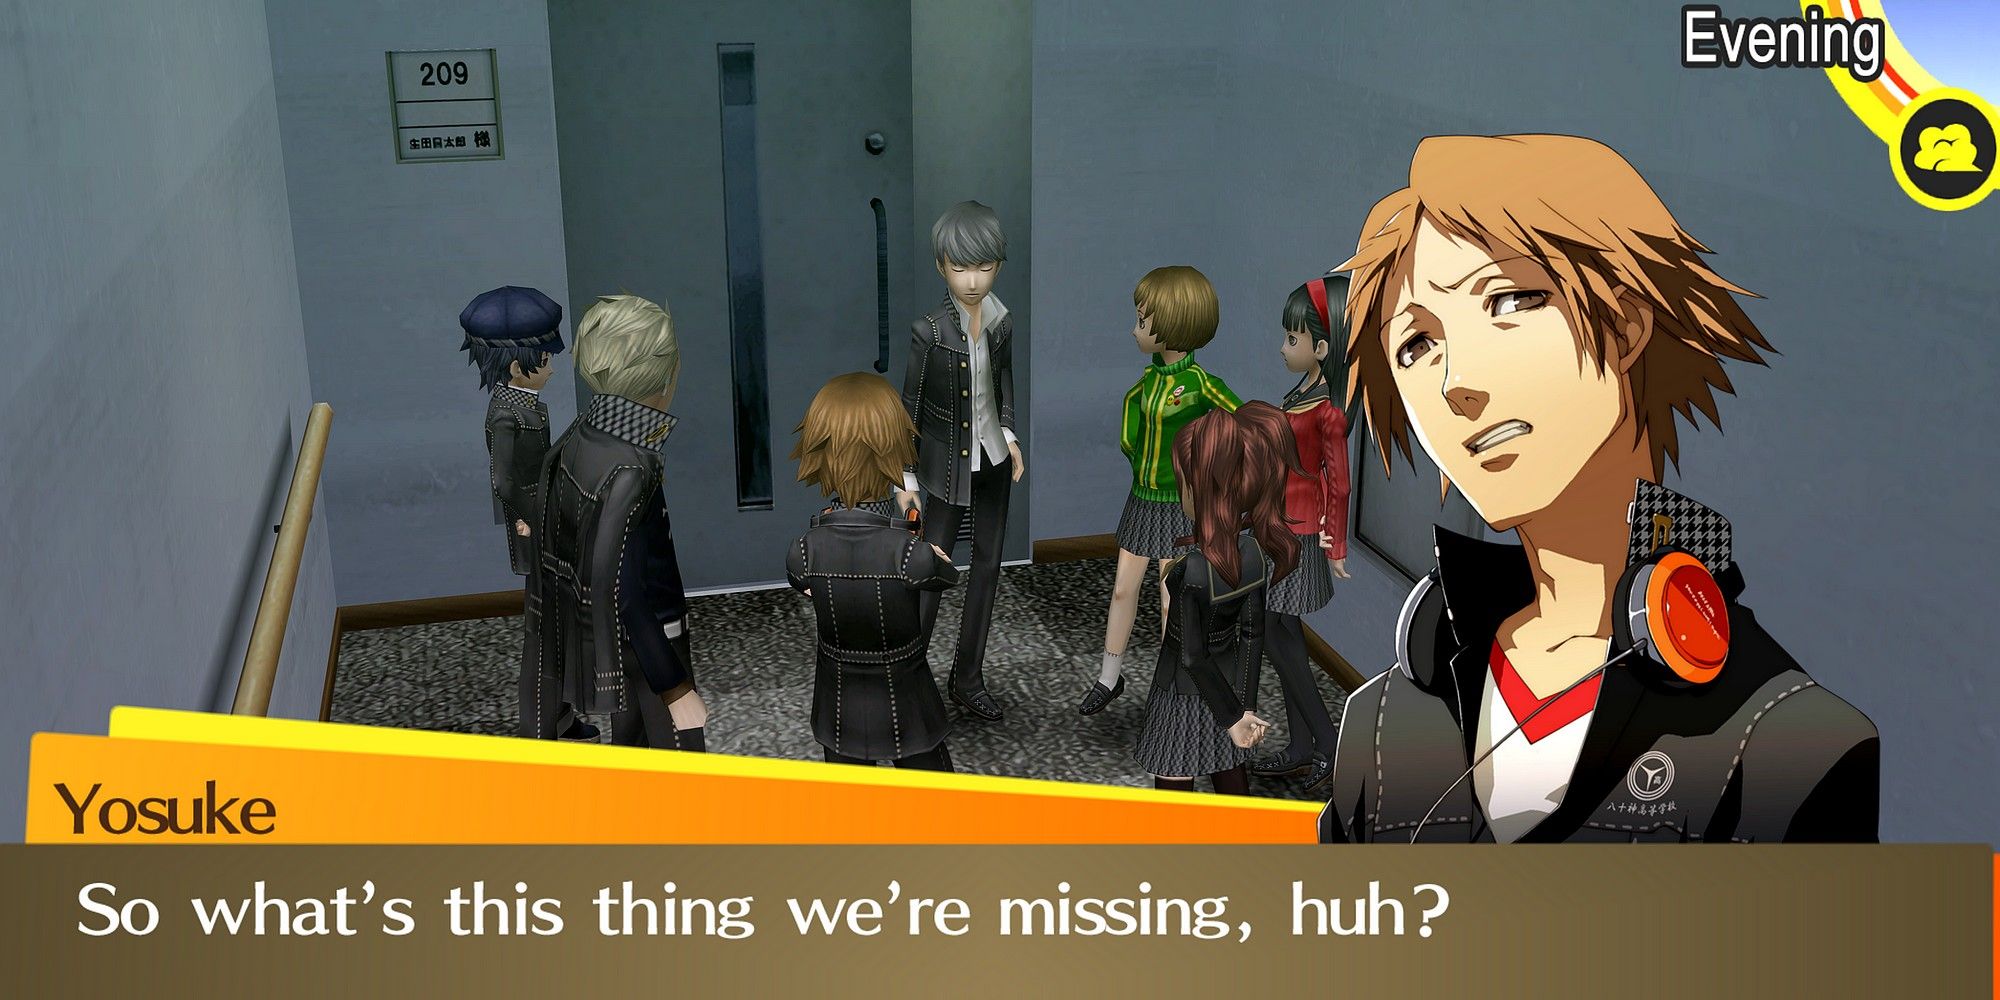 A dialogue box by Yosuke discussing the ending of Persona 4 Golden with the team